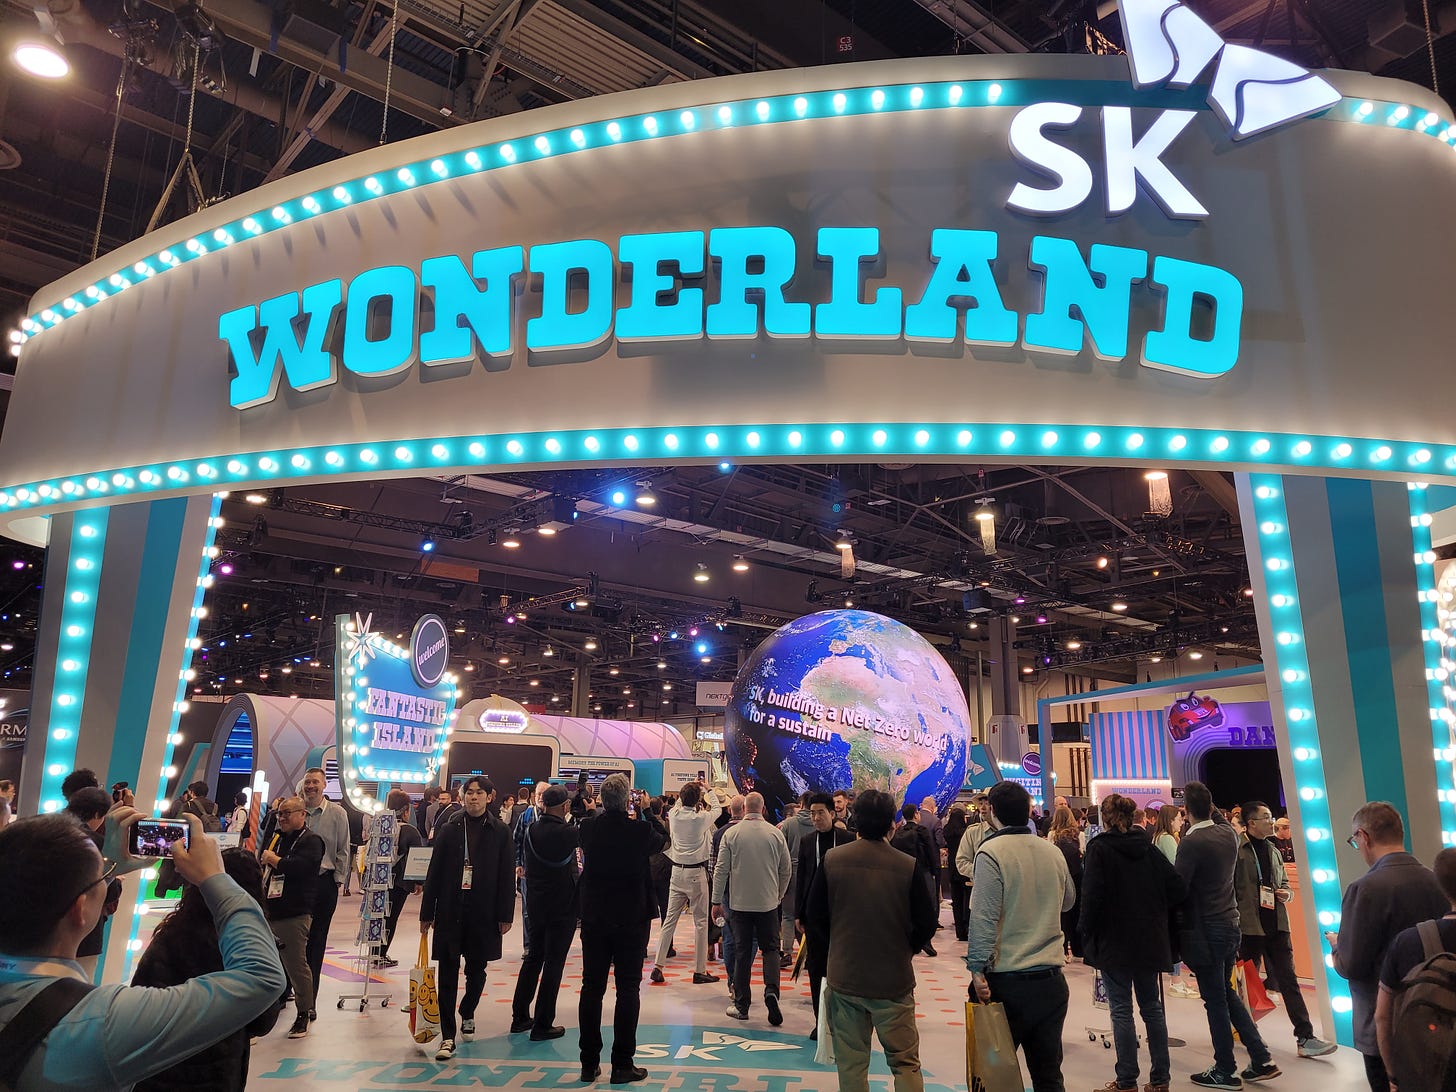 A stand at CES called "SK Wonderland", with crowds of people inside